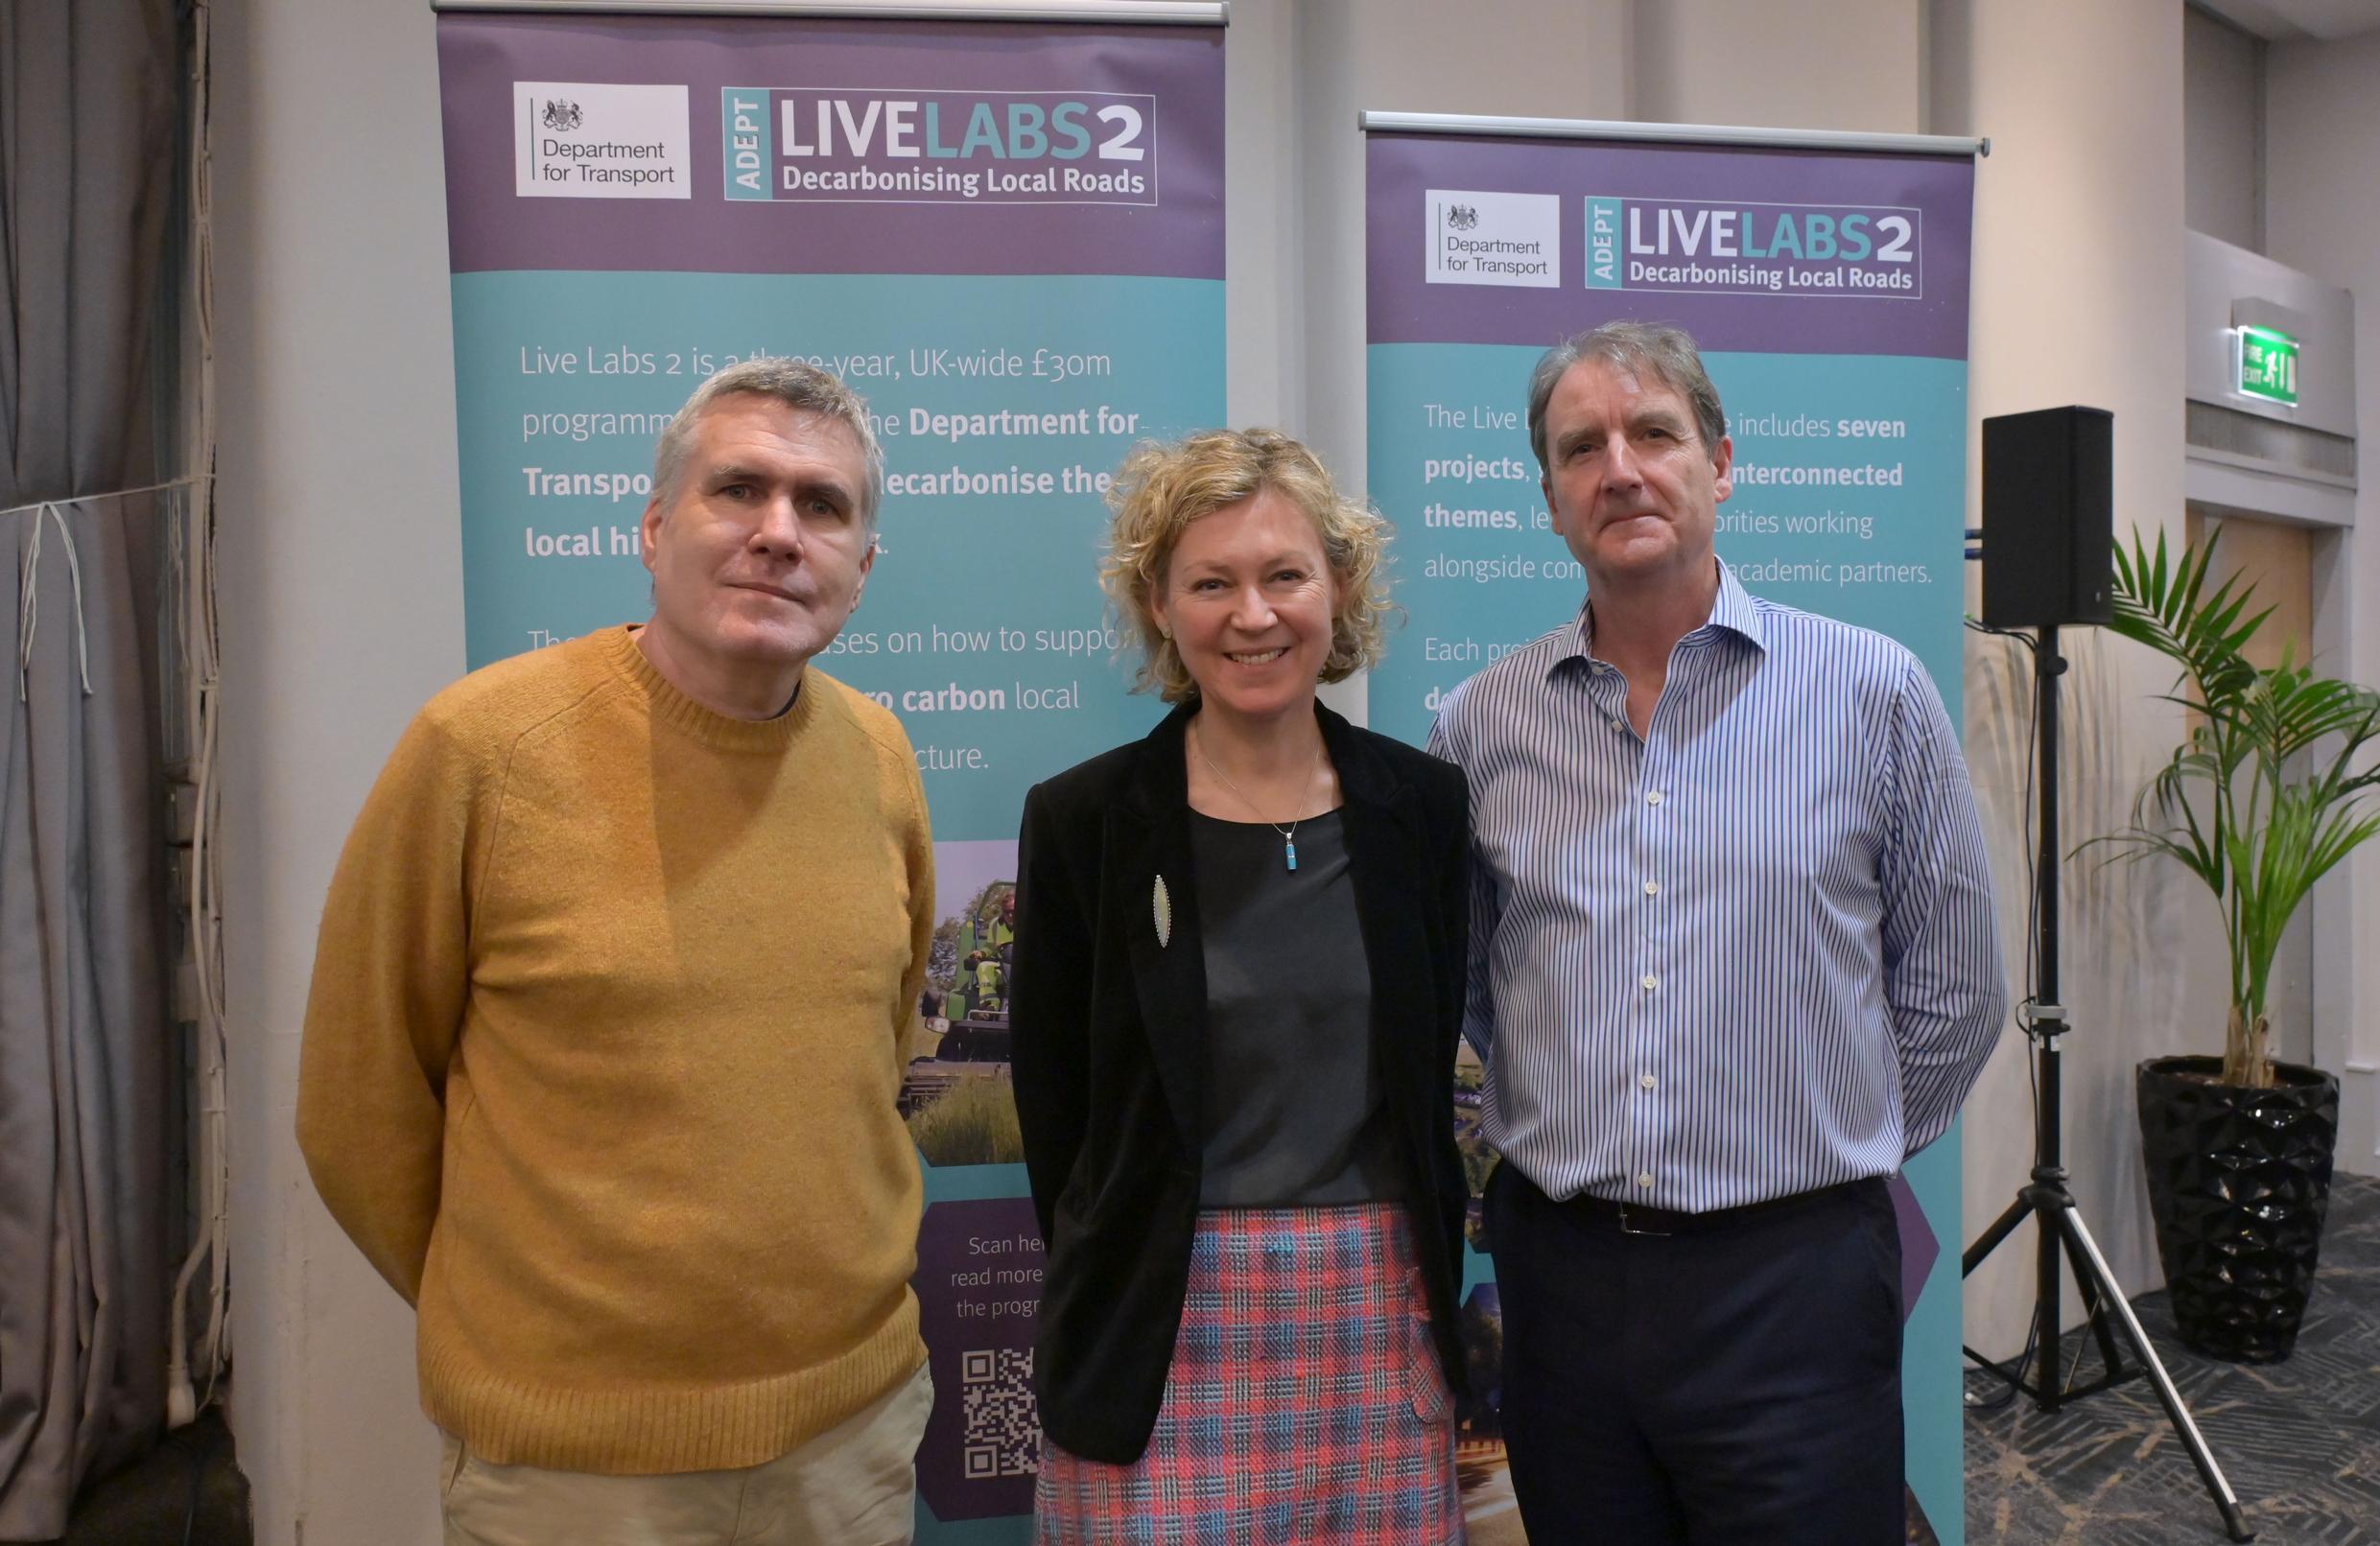 (from left) Giles Perkins, Programme Director for Live Labs 2, Hannah Bartram, Chief Executive Officer of ADEPT and Neil Gibson, Chair of the Live Labs 2 Commissioning Board